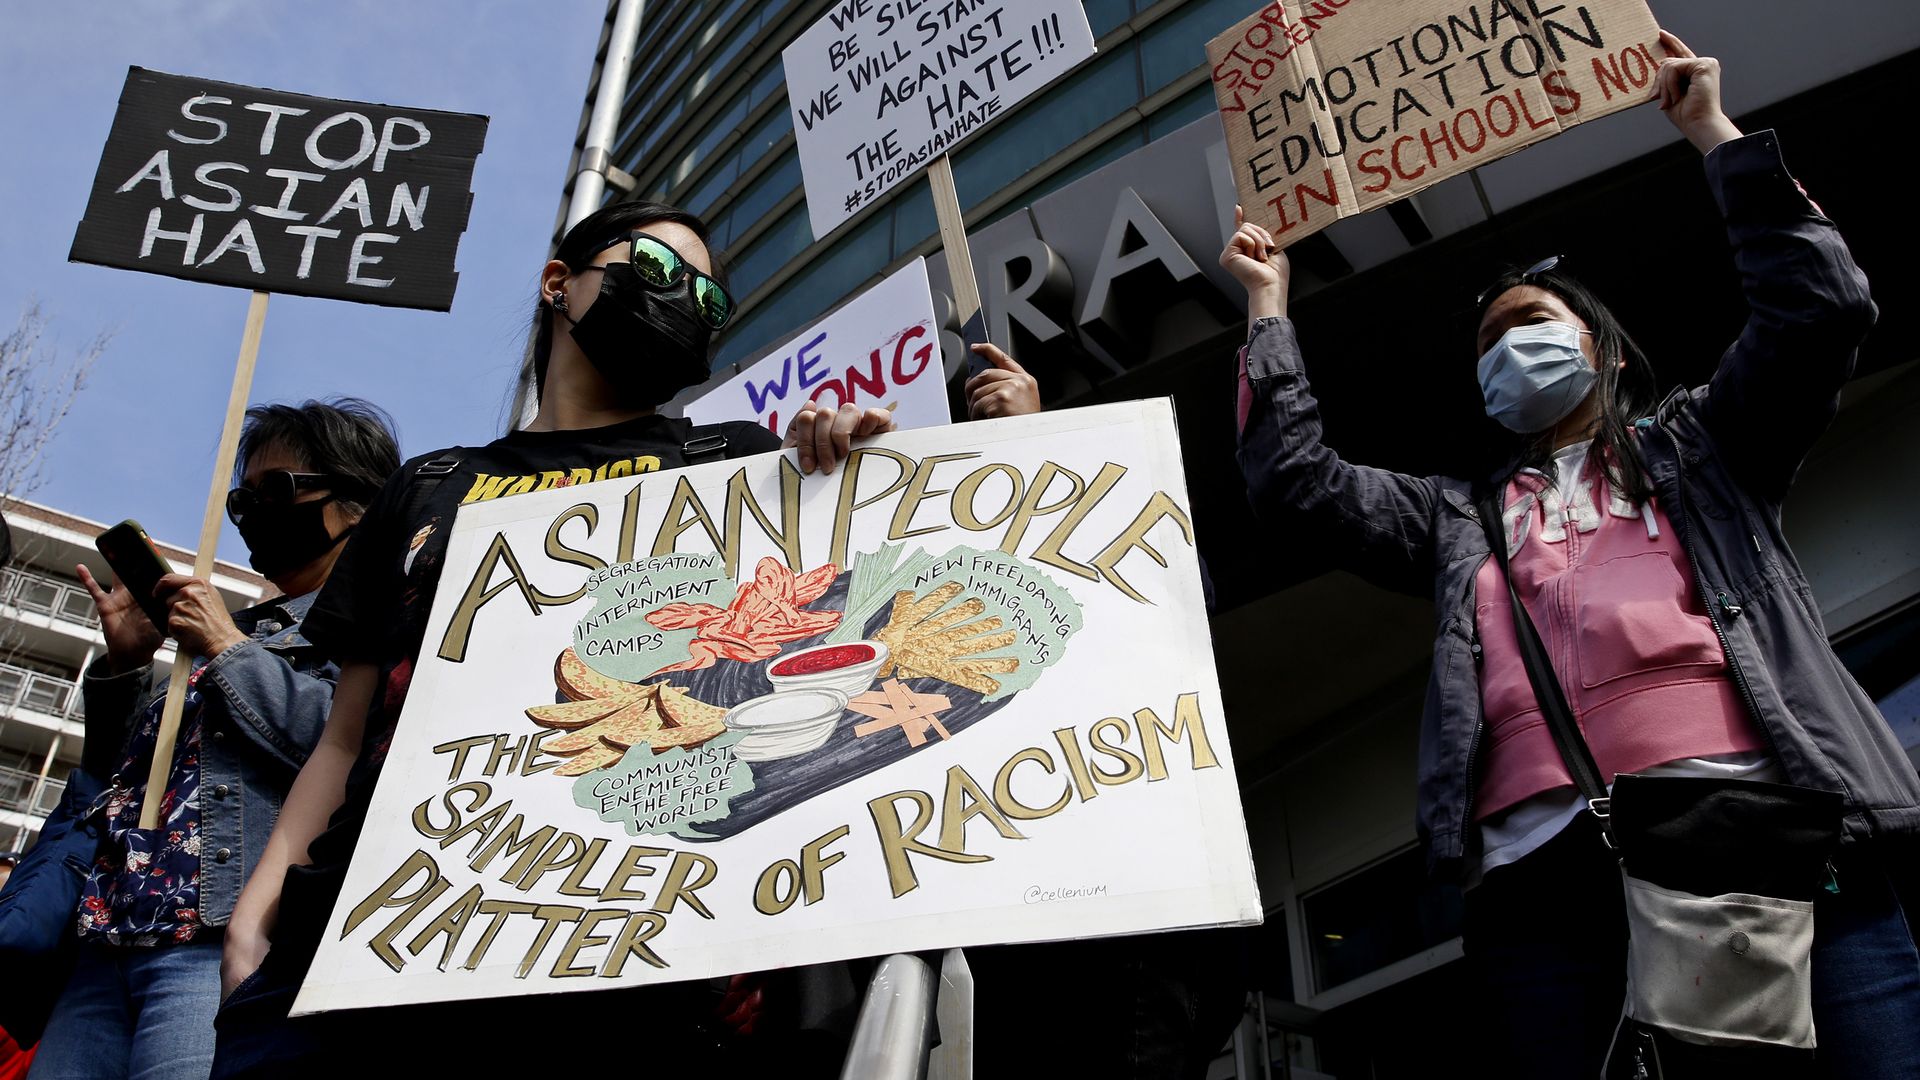 Photo of a person holding a sign that says "Asian people, the sampler platter of racism"